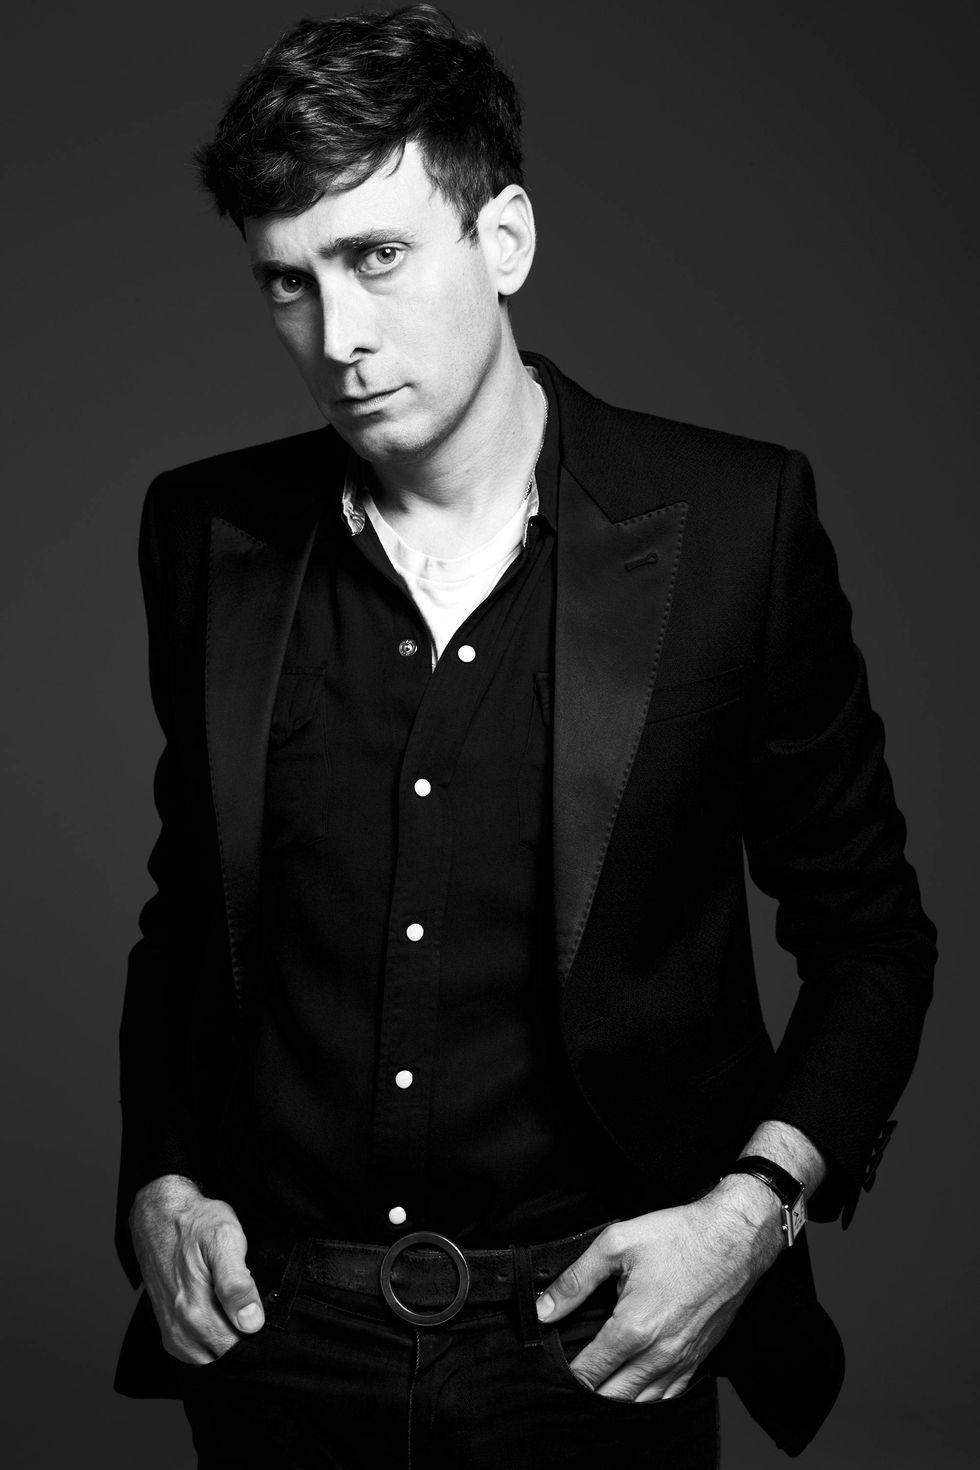 Hedi Slimane explains why he likes tampering with iconic fashion logos